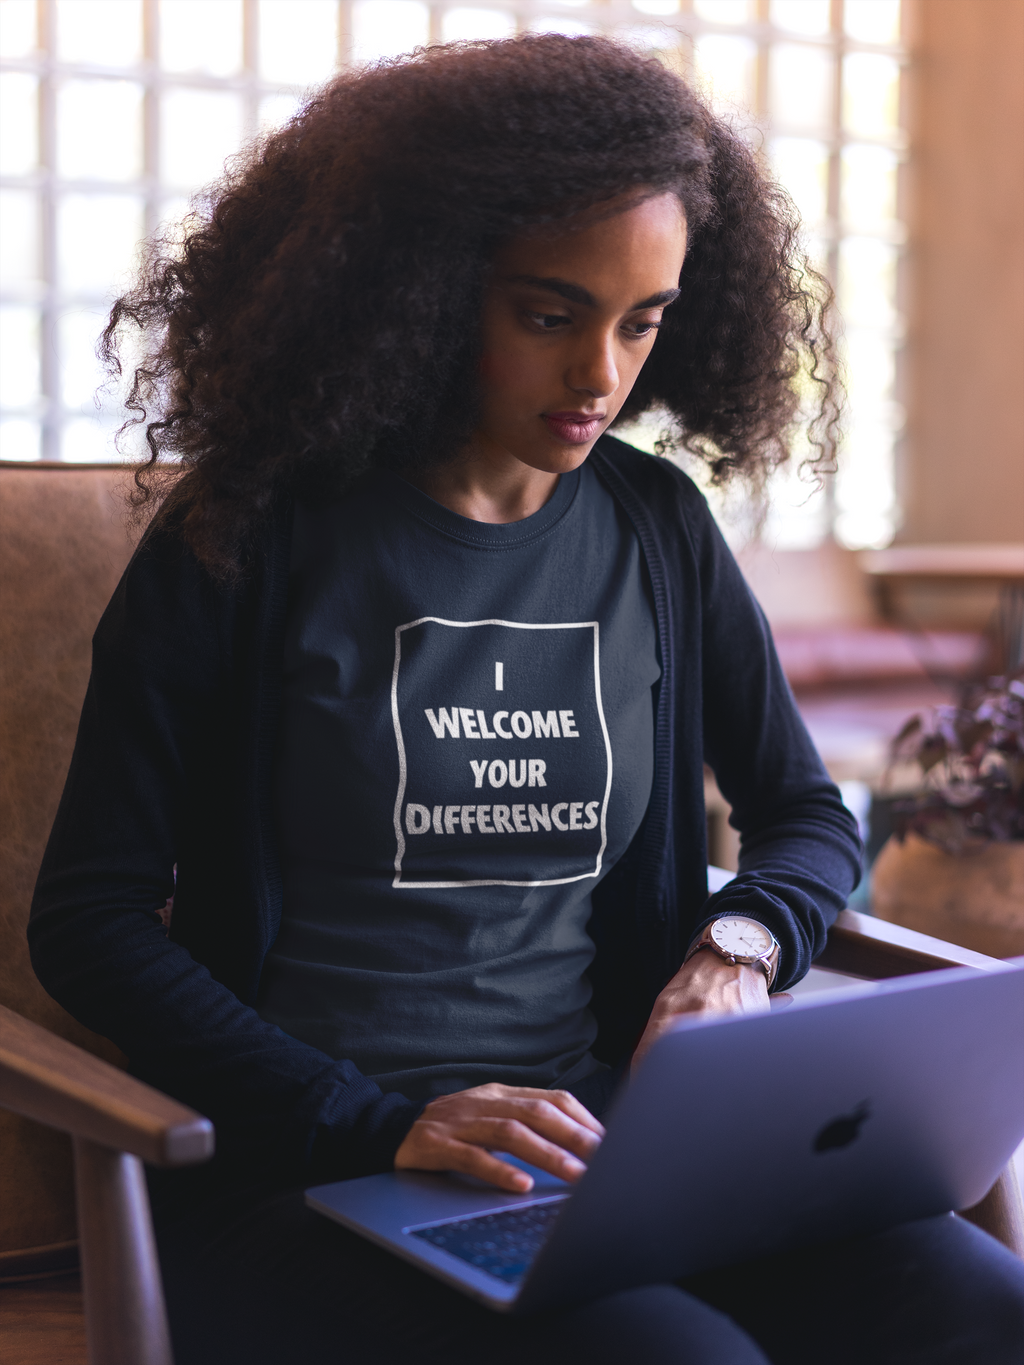 I WELCOME YOUR DIFFERENCES™ TEE - NAVY